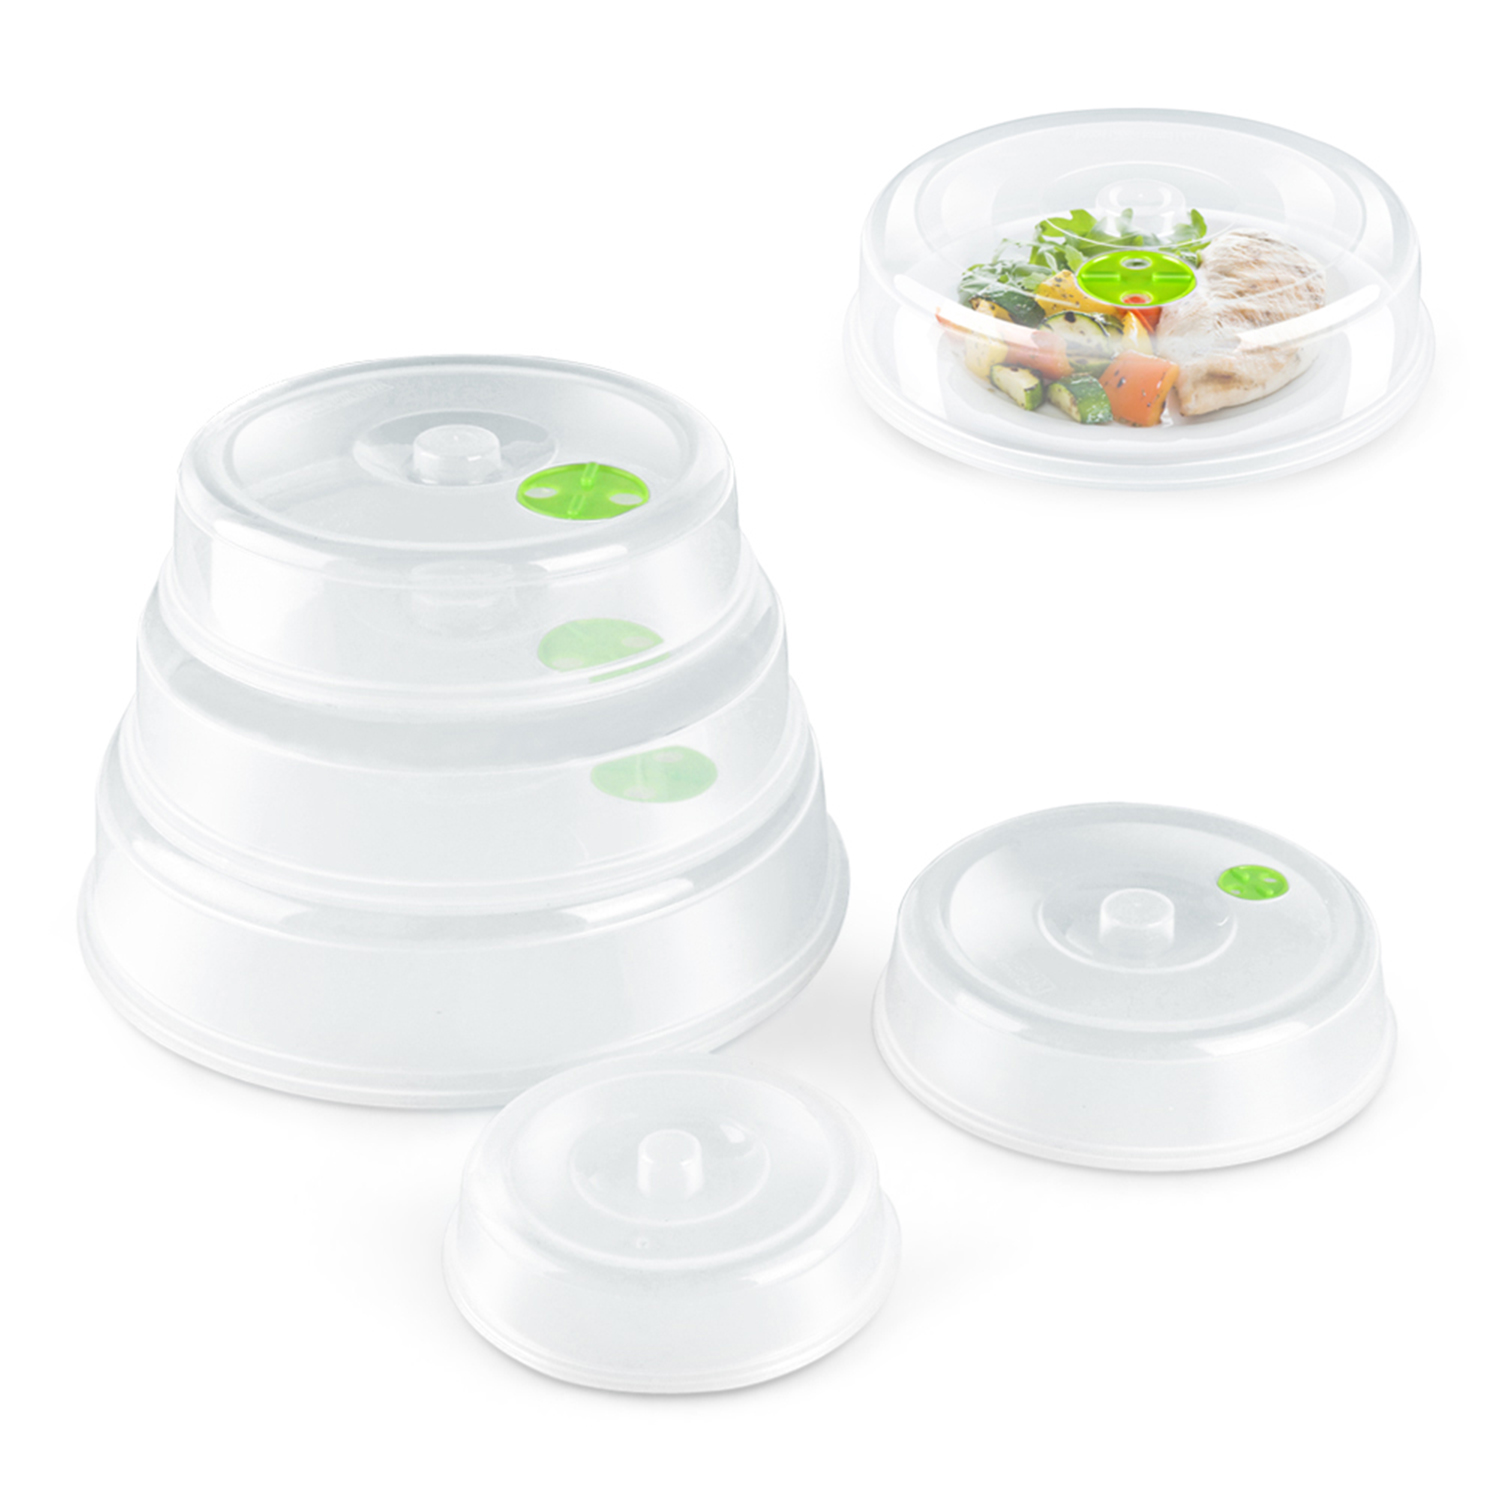 CE Compass DISH_CVR_5S Microwave Cover for Food, 5 Piece Set Plate